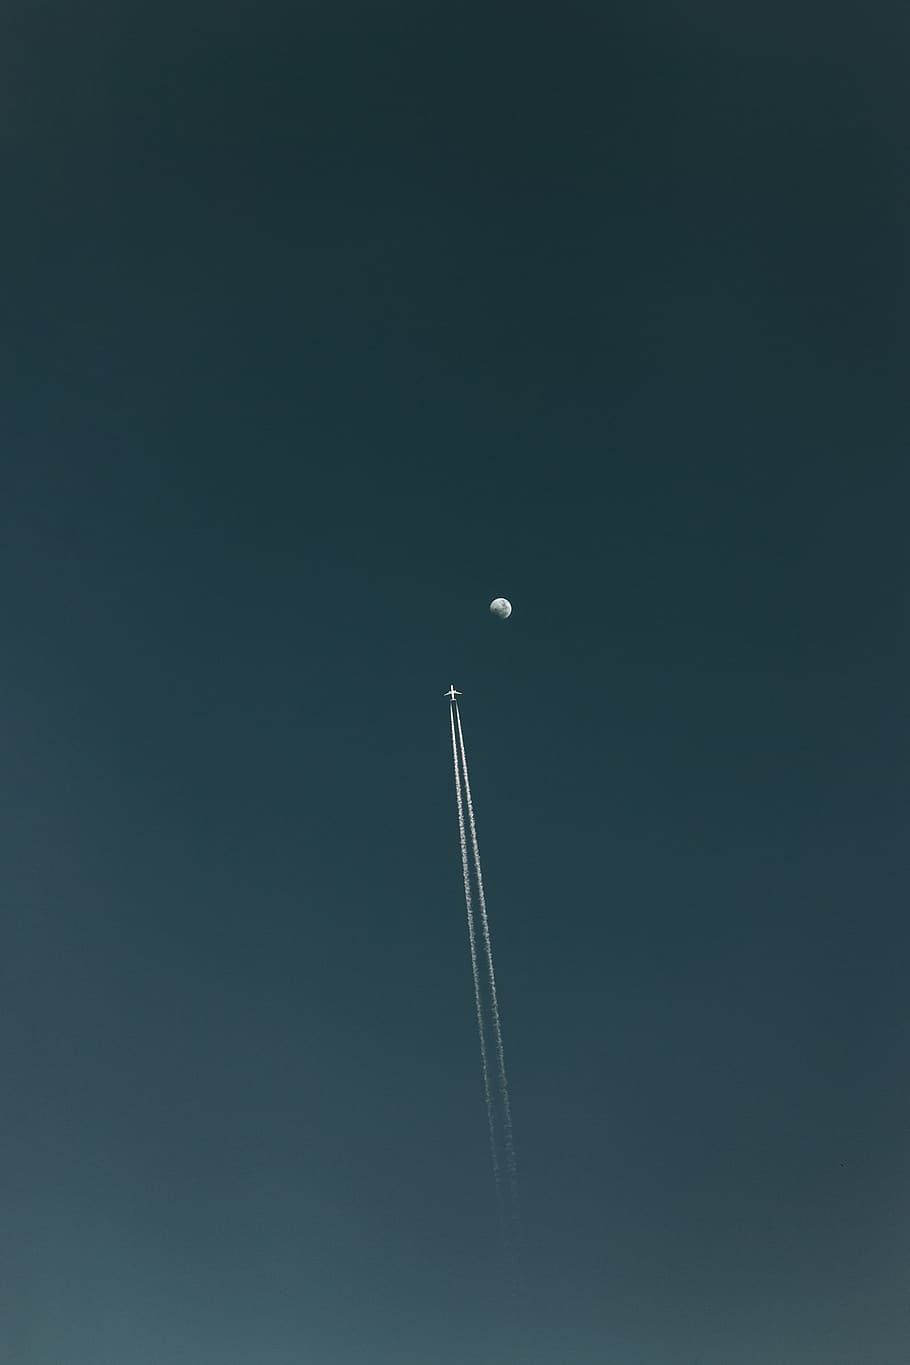 flying plane with contrail during nighttime, sky, air vehicle